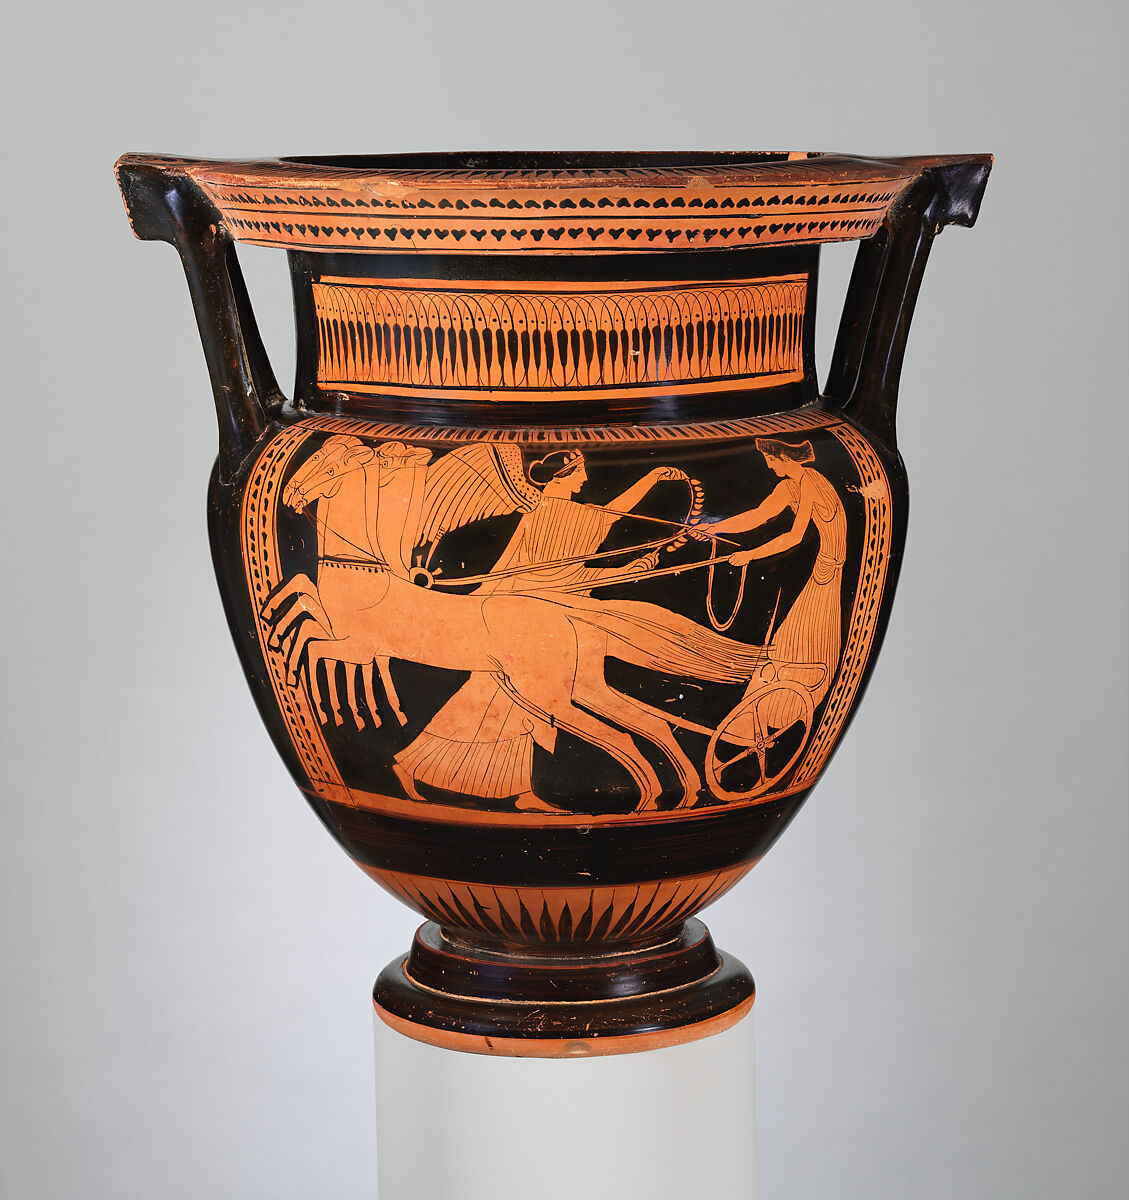 Terracotta column-krater (bowl for mixing wine and water), Attributed to the Nausicaä Painter, Terracotta, Greek, Attic 